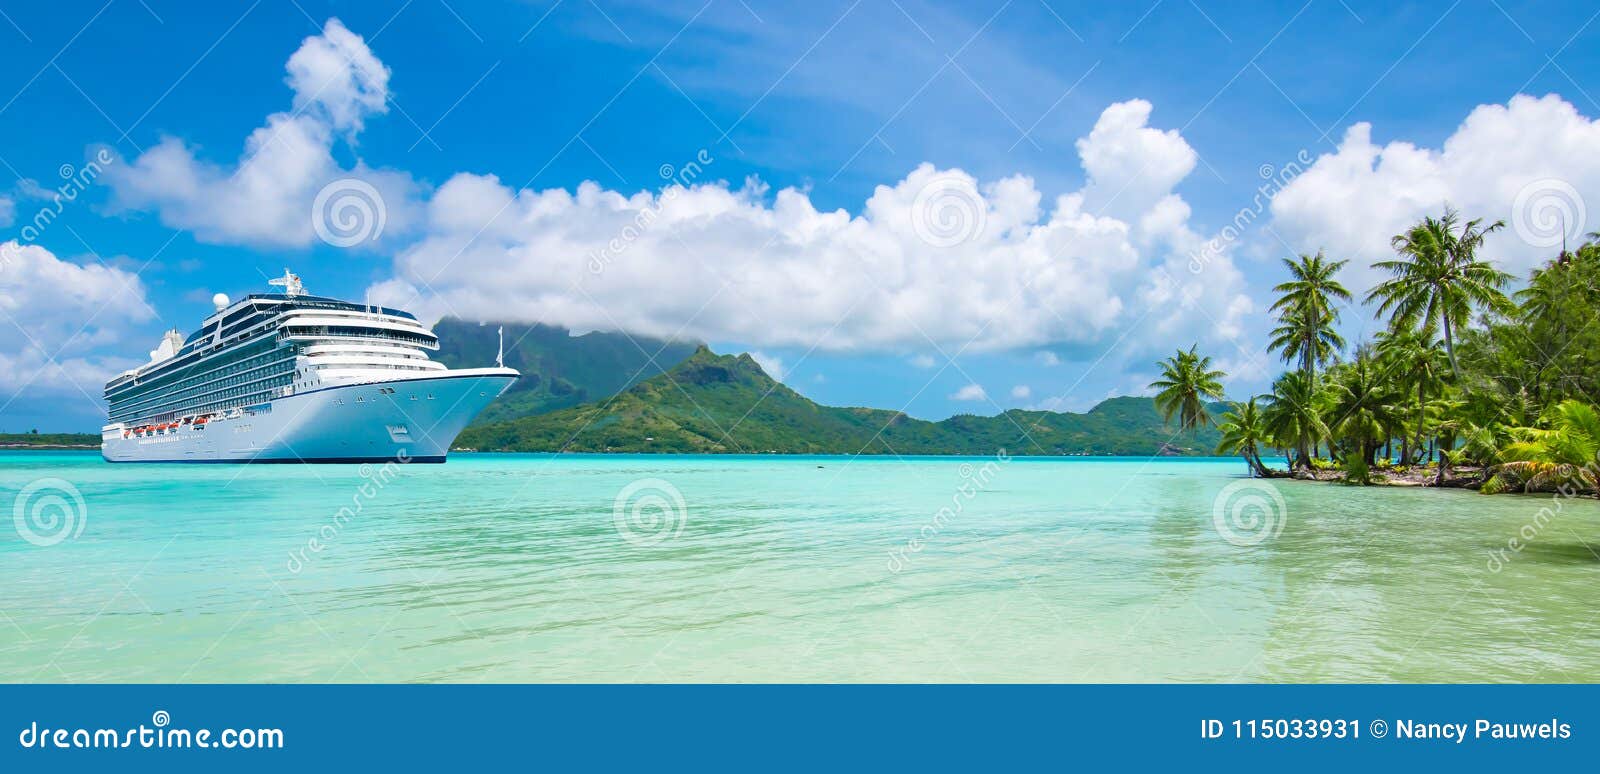 summer cruise vacation travel. panoramic landscape view with cruise ship in bora bora.